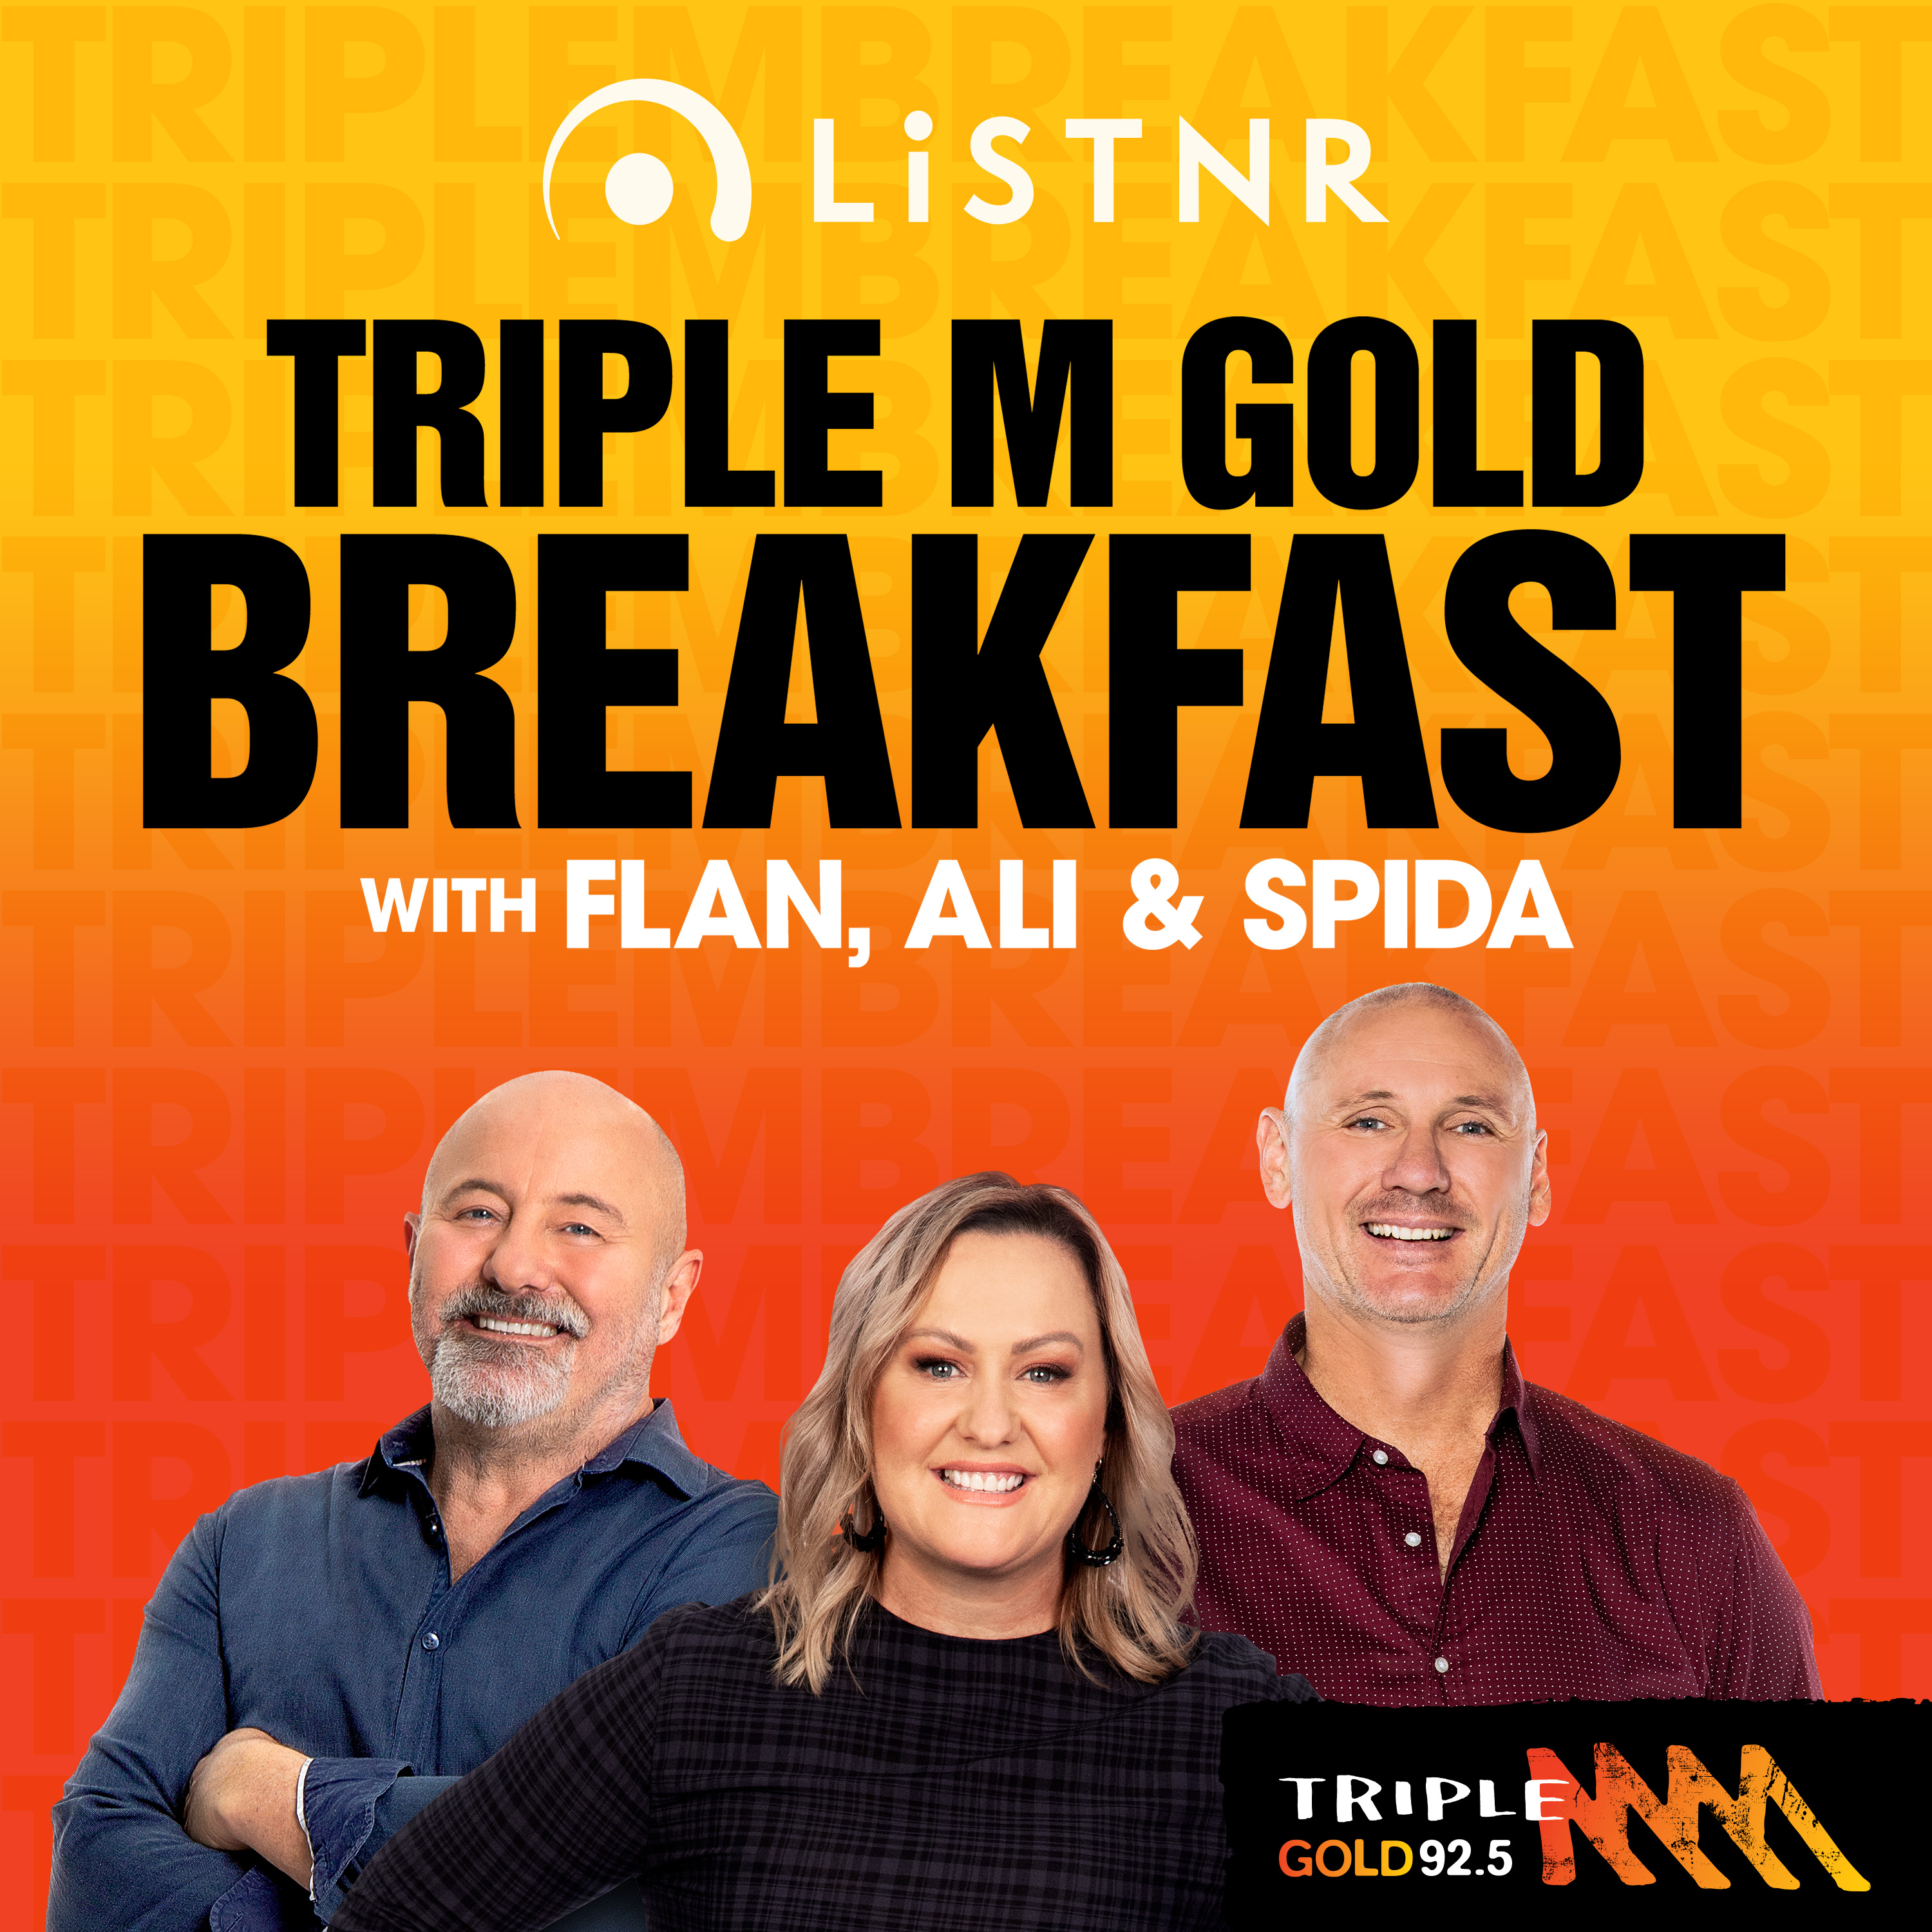 You'd never believe where Bridge, Spida, and some of the other members of the Triple M family have shown up in a cop car!